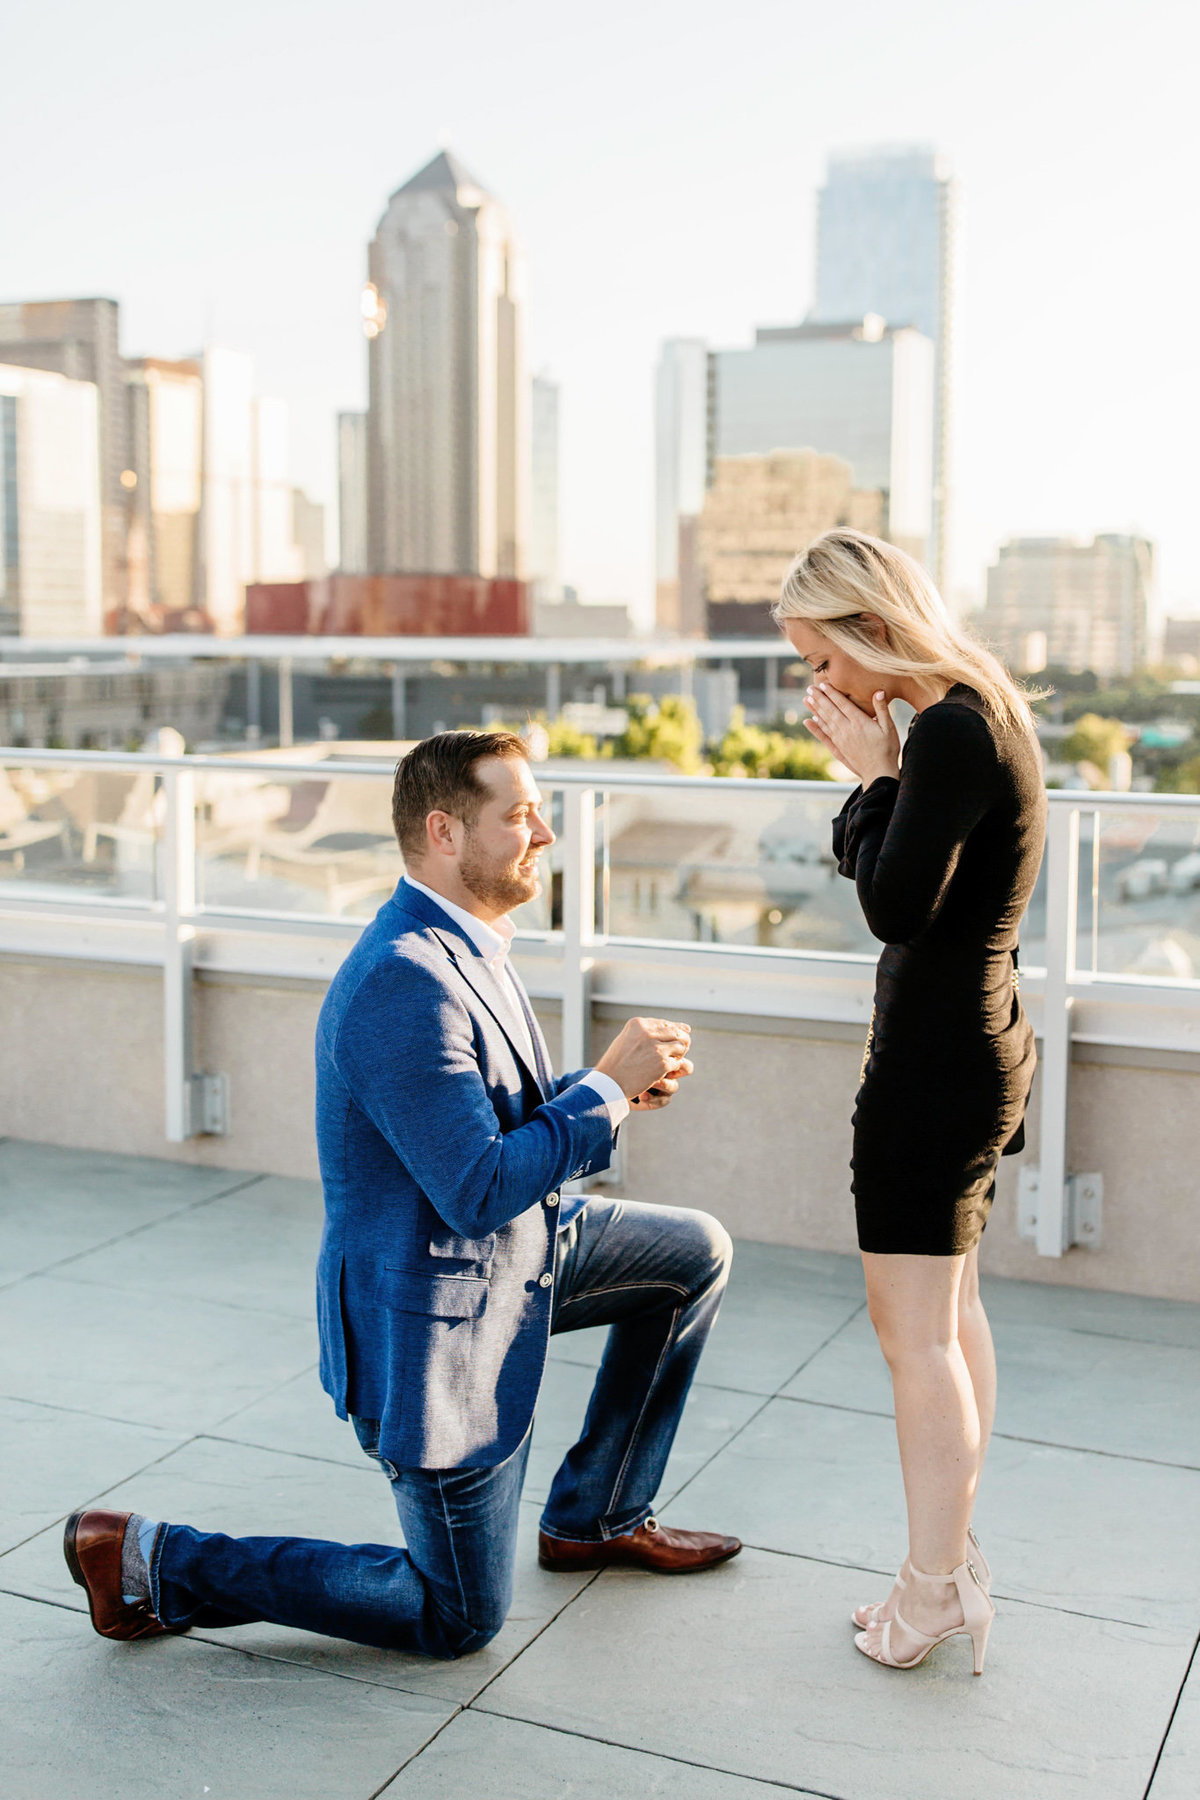 Eric & Megan - Downtown Dallas Rooftop Proposal & Engagement Session-34